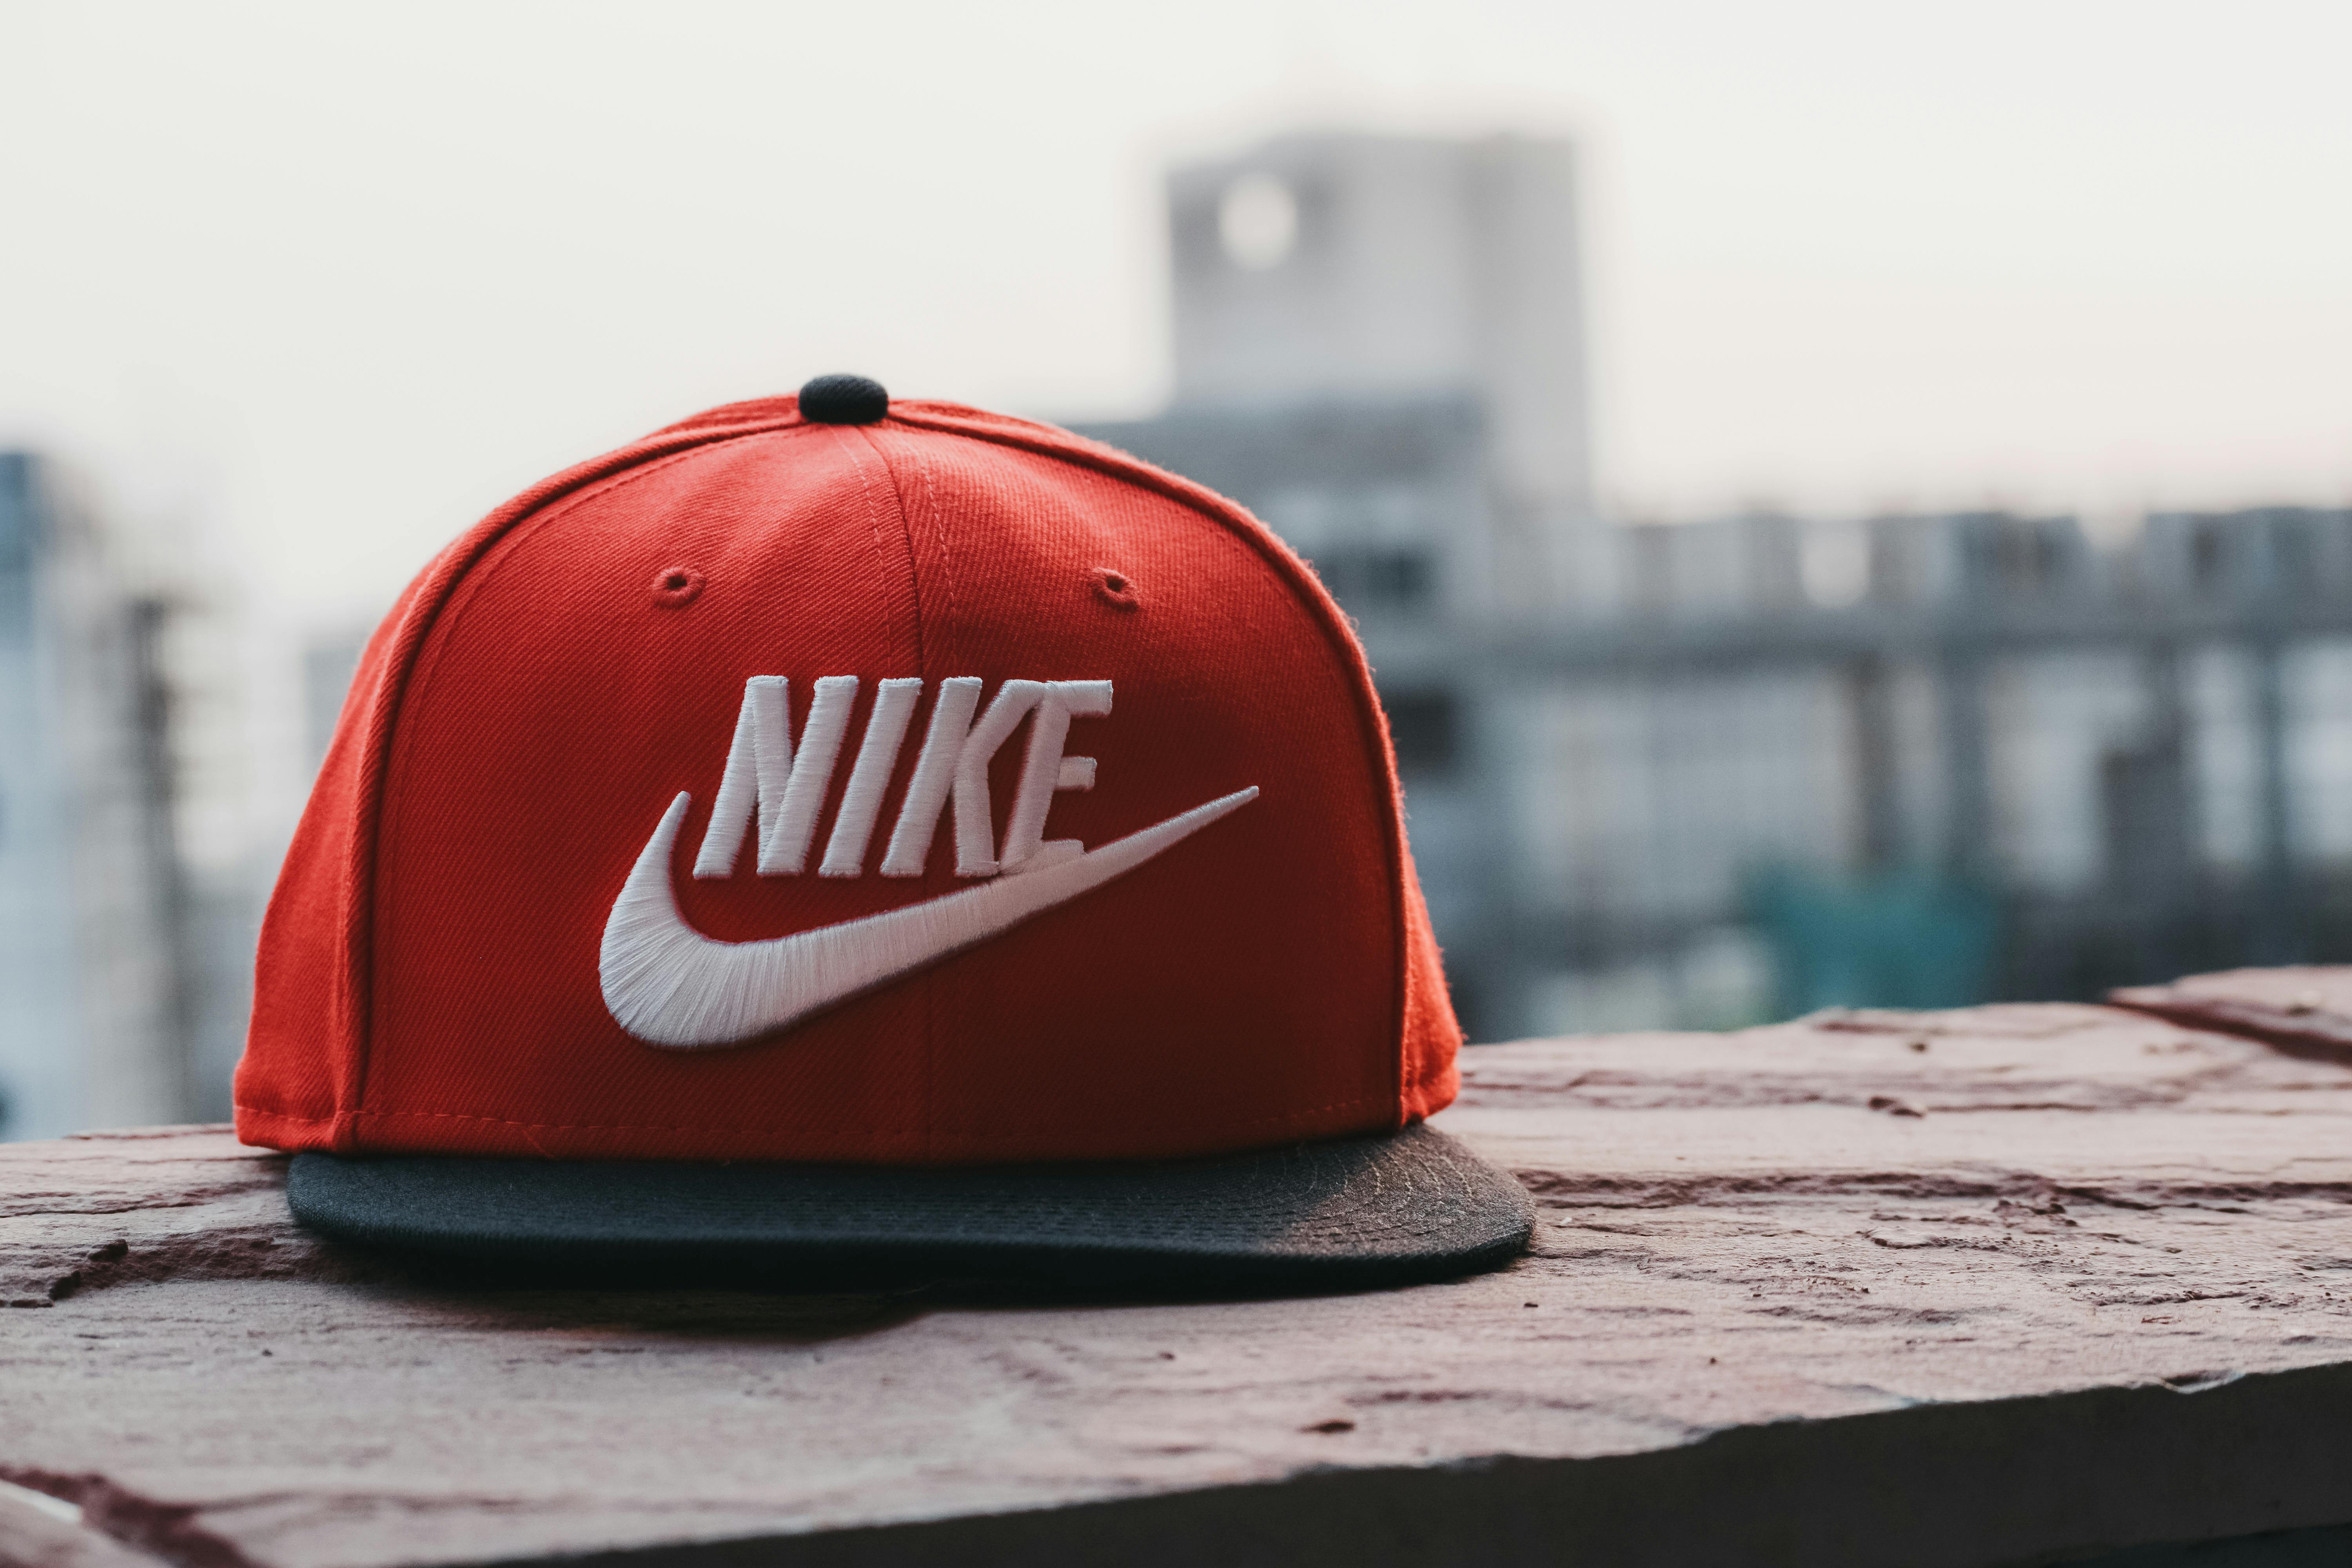 Nike Photos, Download The BEST Free Nike Stock Photos & HD Images